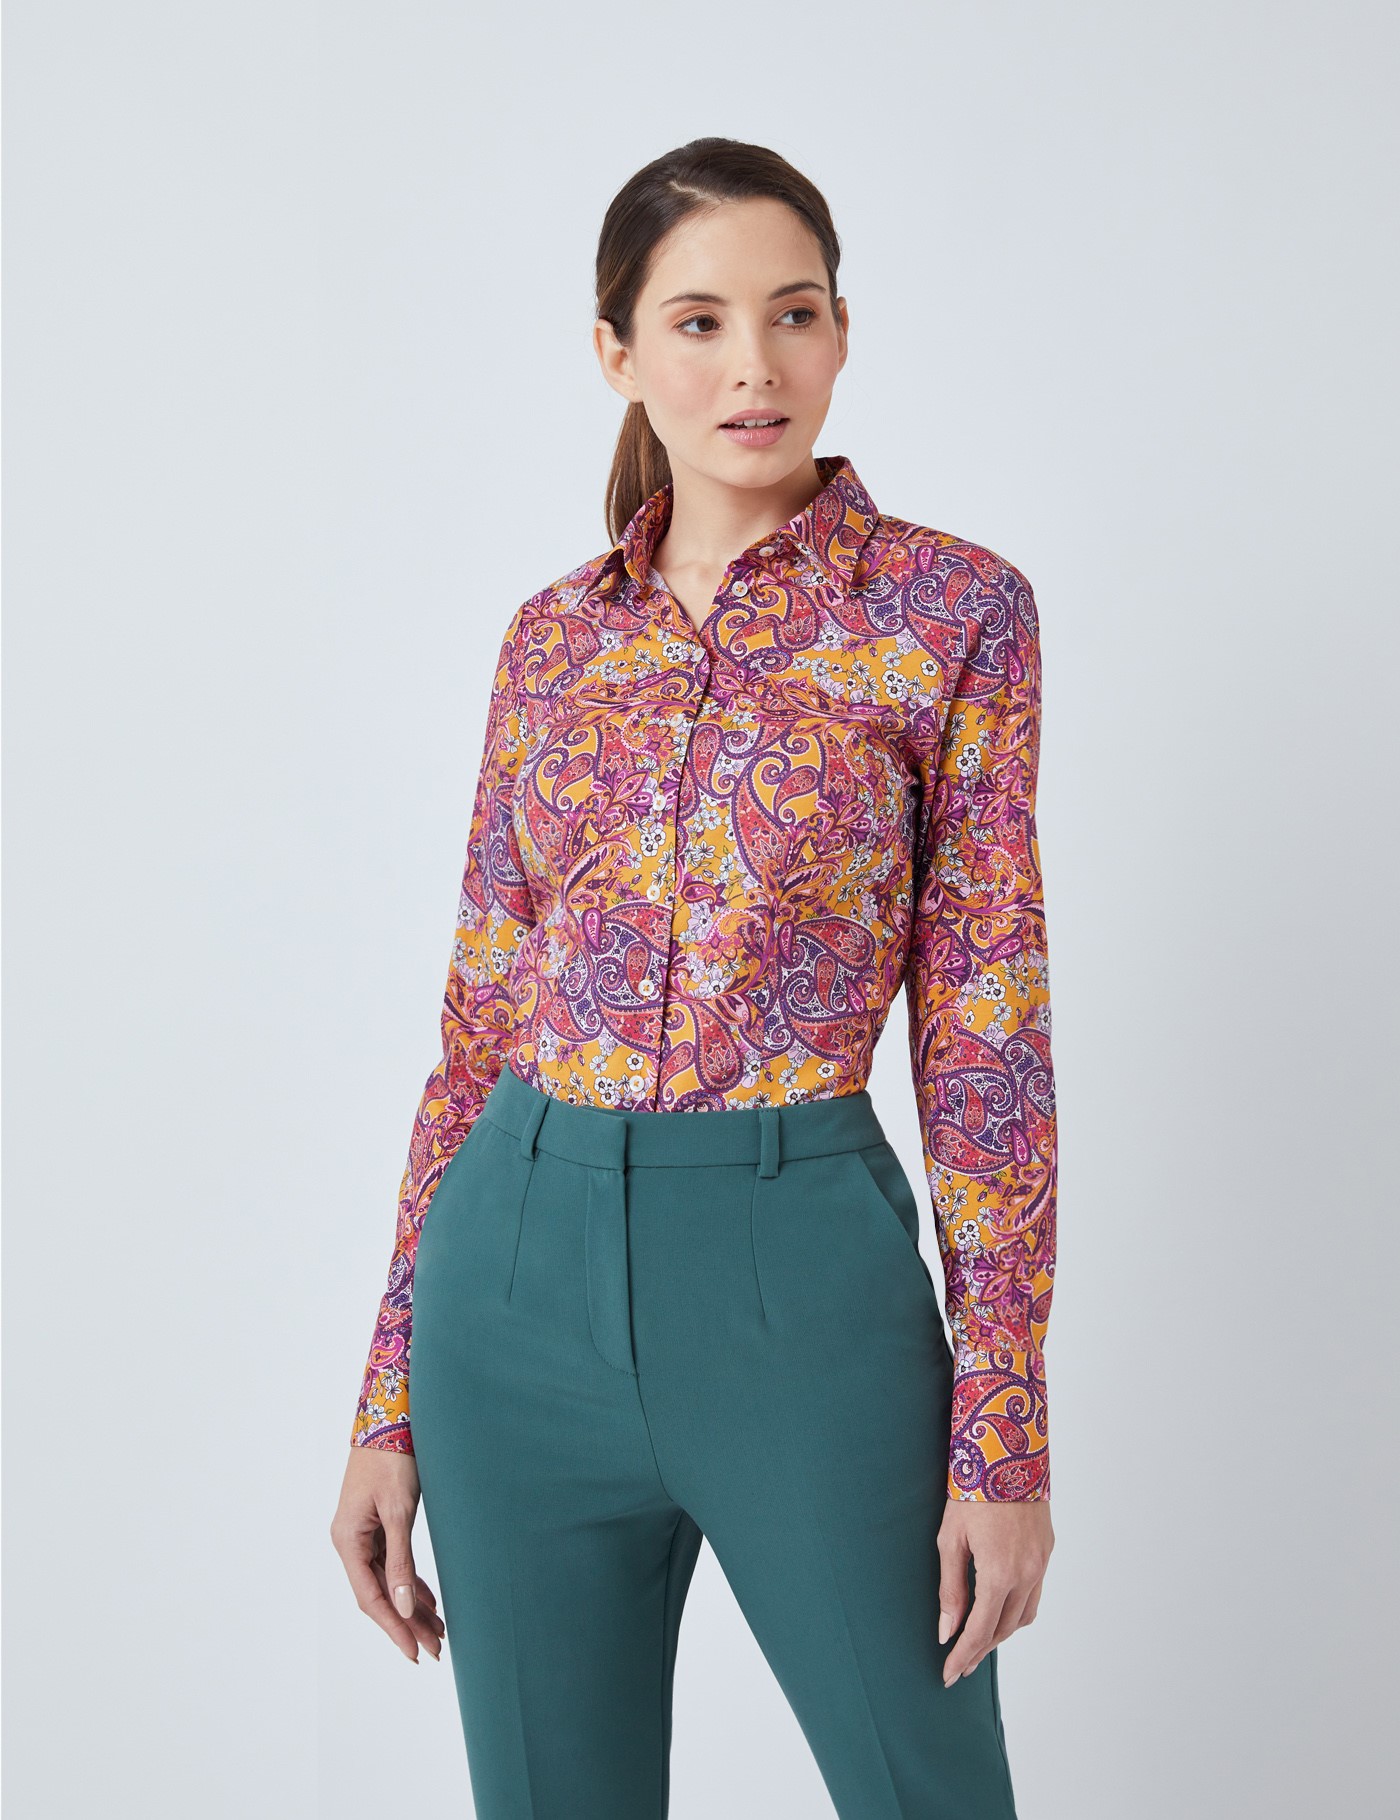 Cotton Women's Fitted Shirt with Floral Paisley Print in Mustard ...